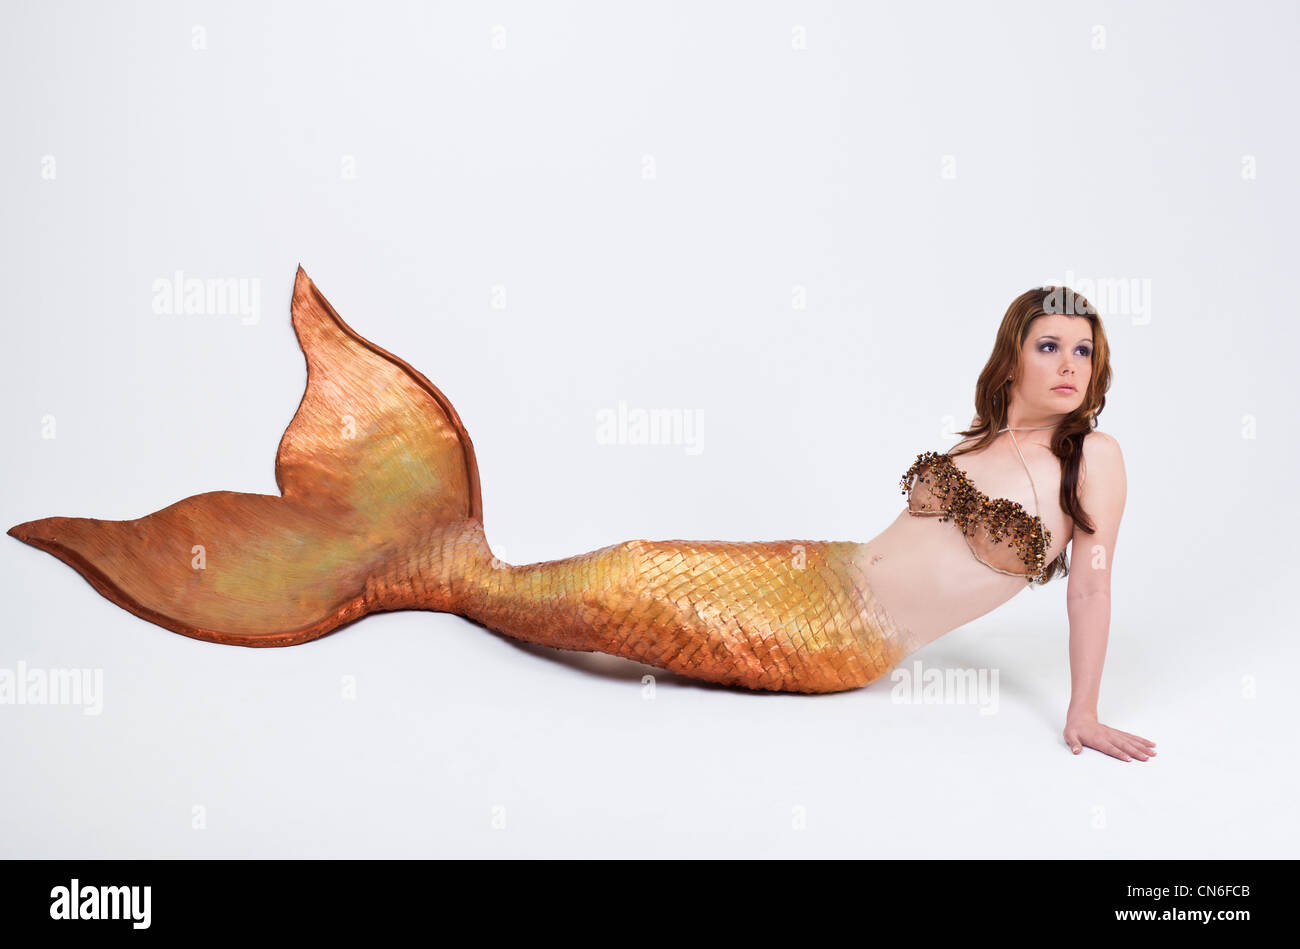 Mermaid posing in studio, with a decorative wire mesh top Stock Photo